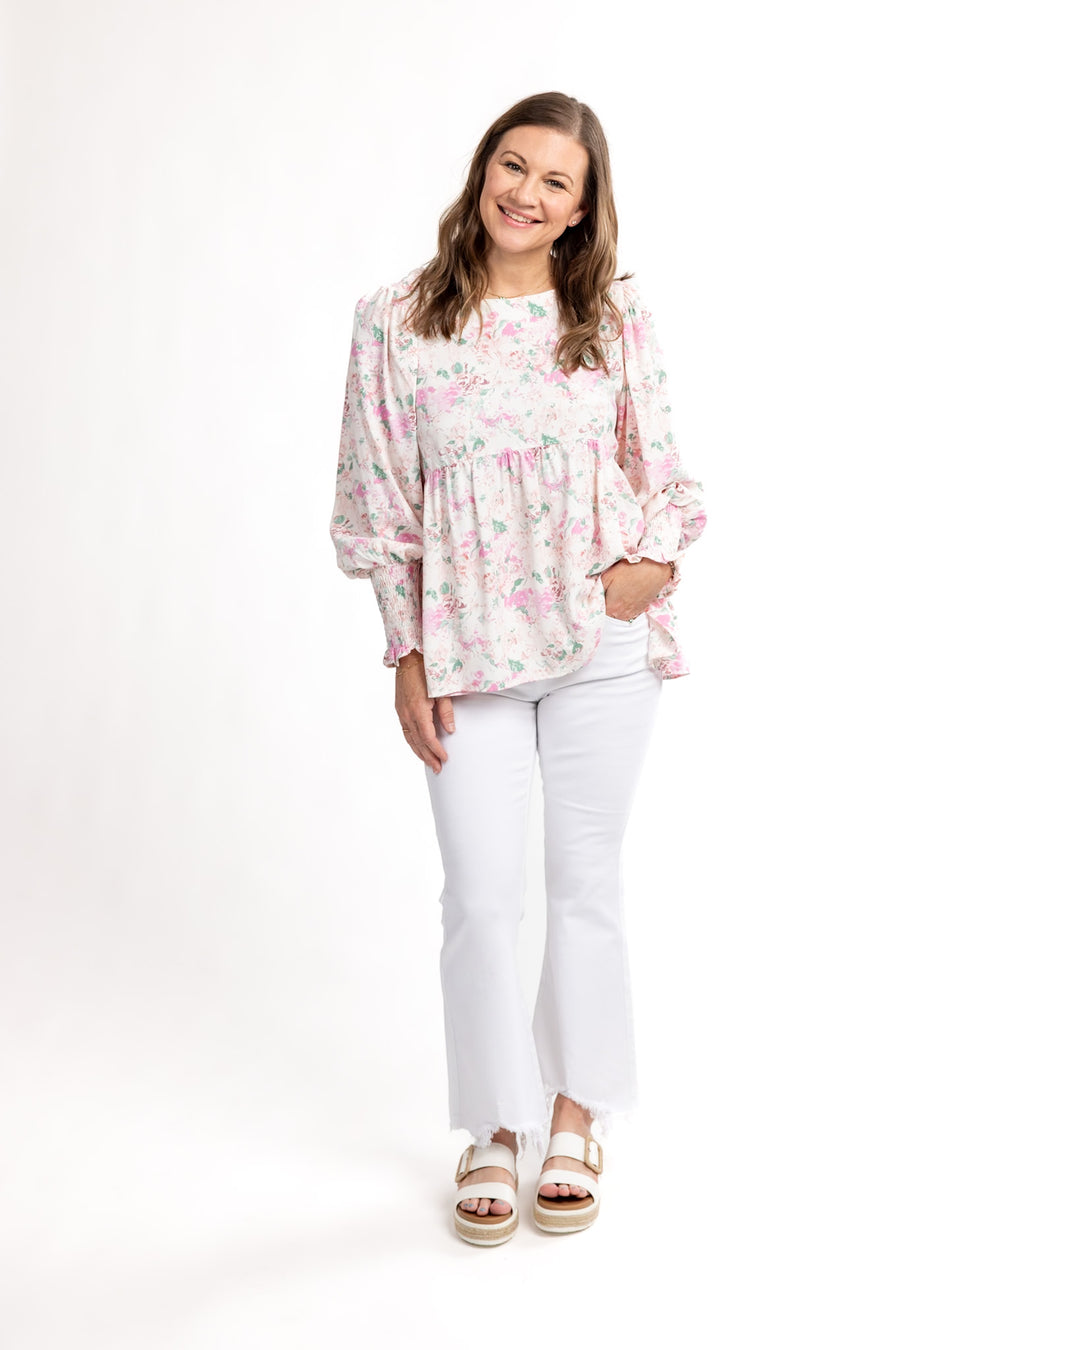 Classic Spring Floral Blouse